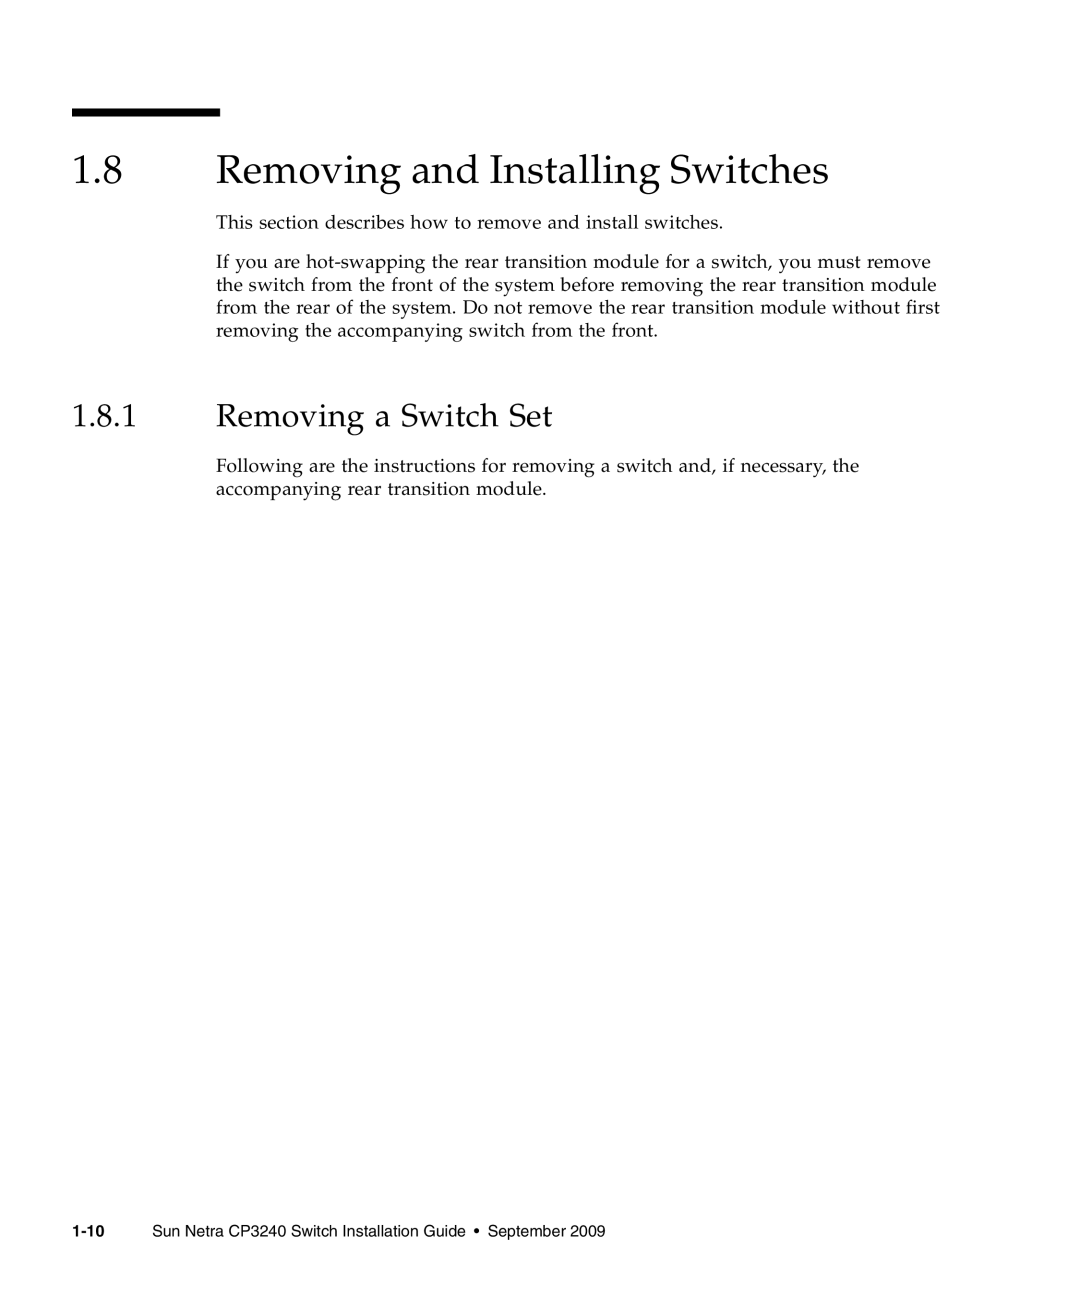 Sun Microsystems CP3240 manual Removing and Installing Switches, Removing a Switch Set 